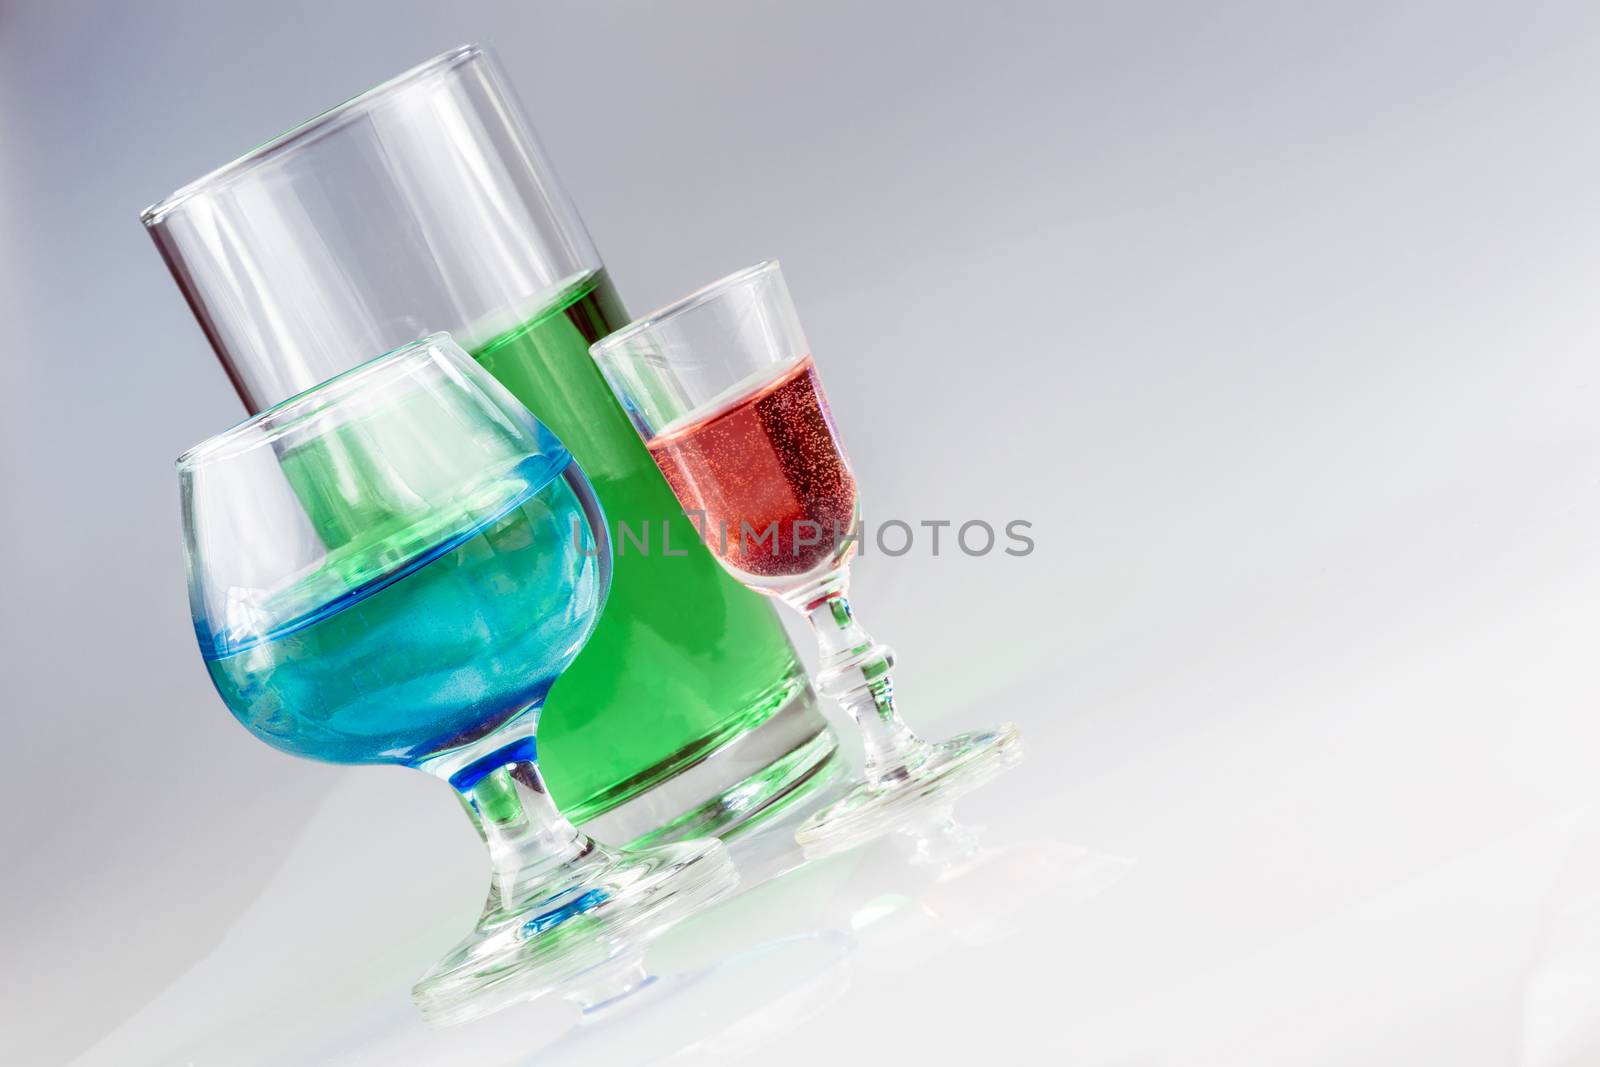 Three different style drinking glasses full of bright colorful liquid.